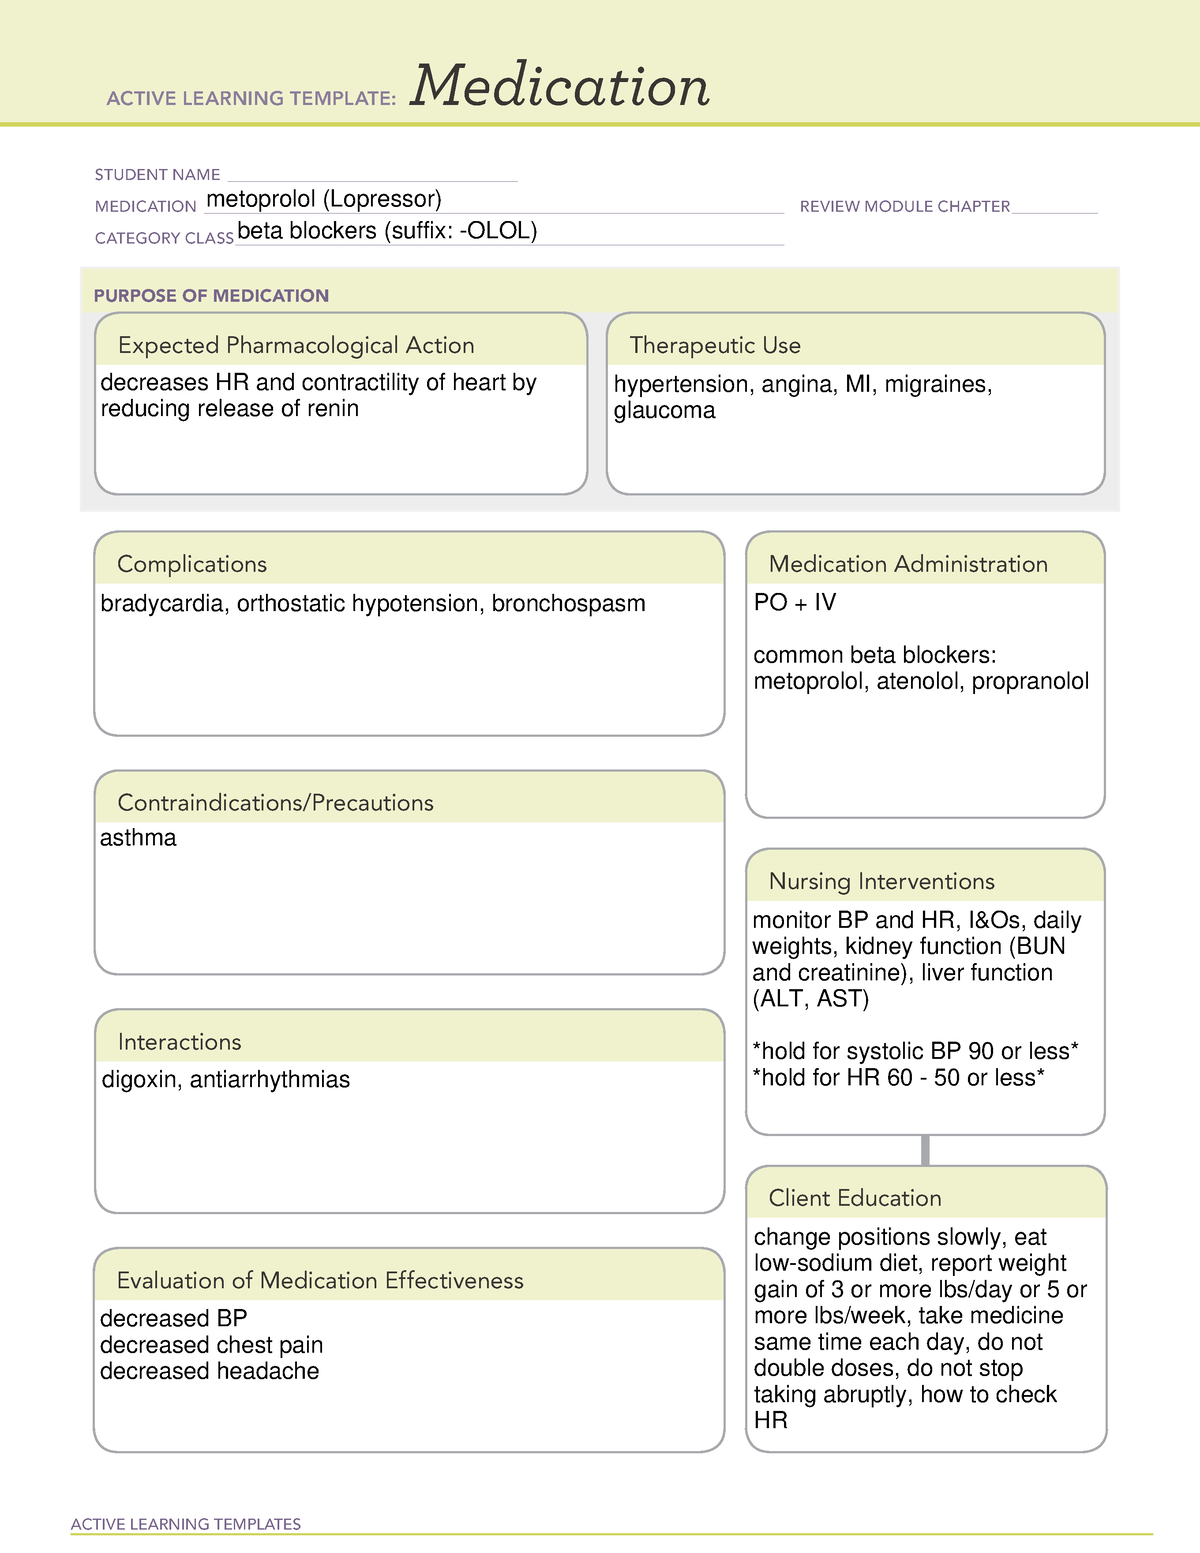 Medication Template metoprolol ACTIVE LEARNING TEMPLATES Medication